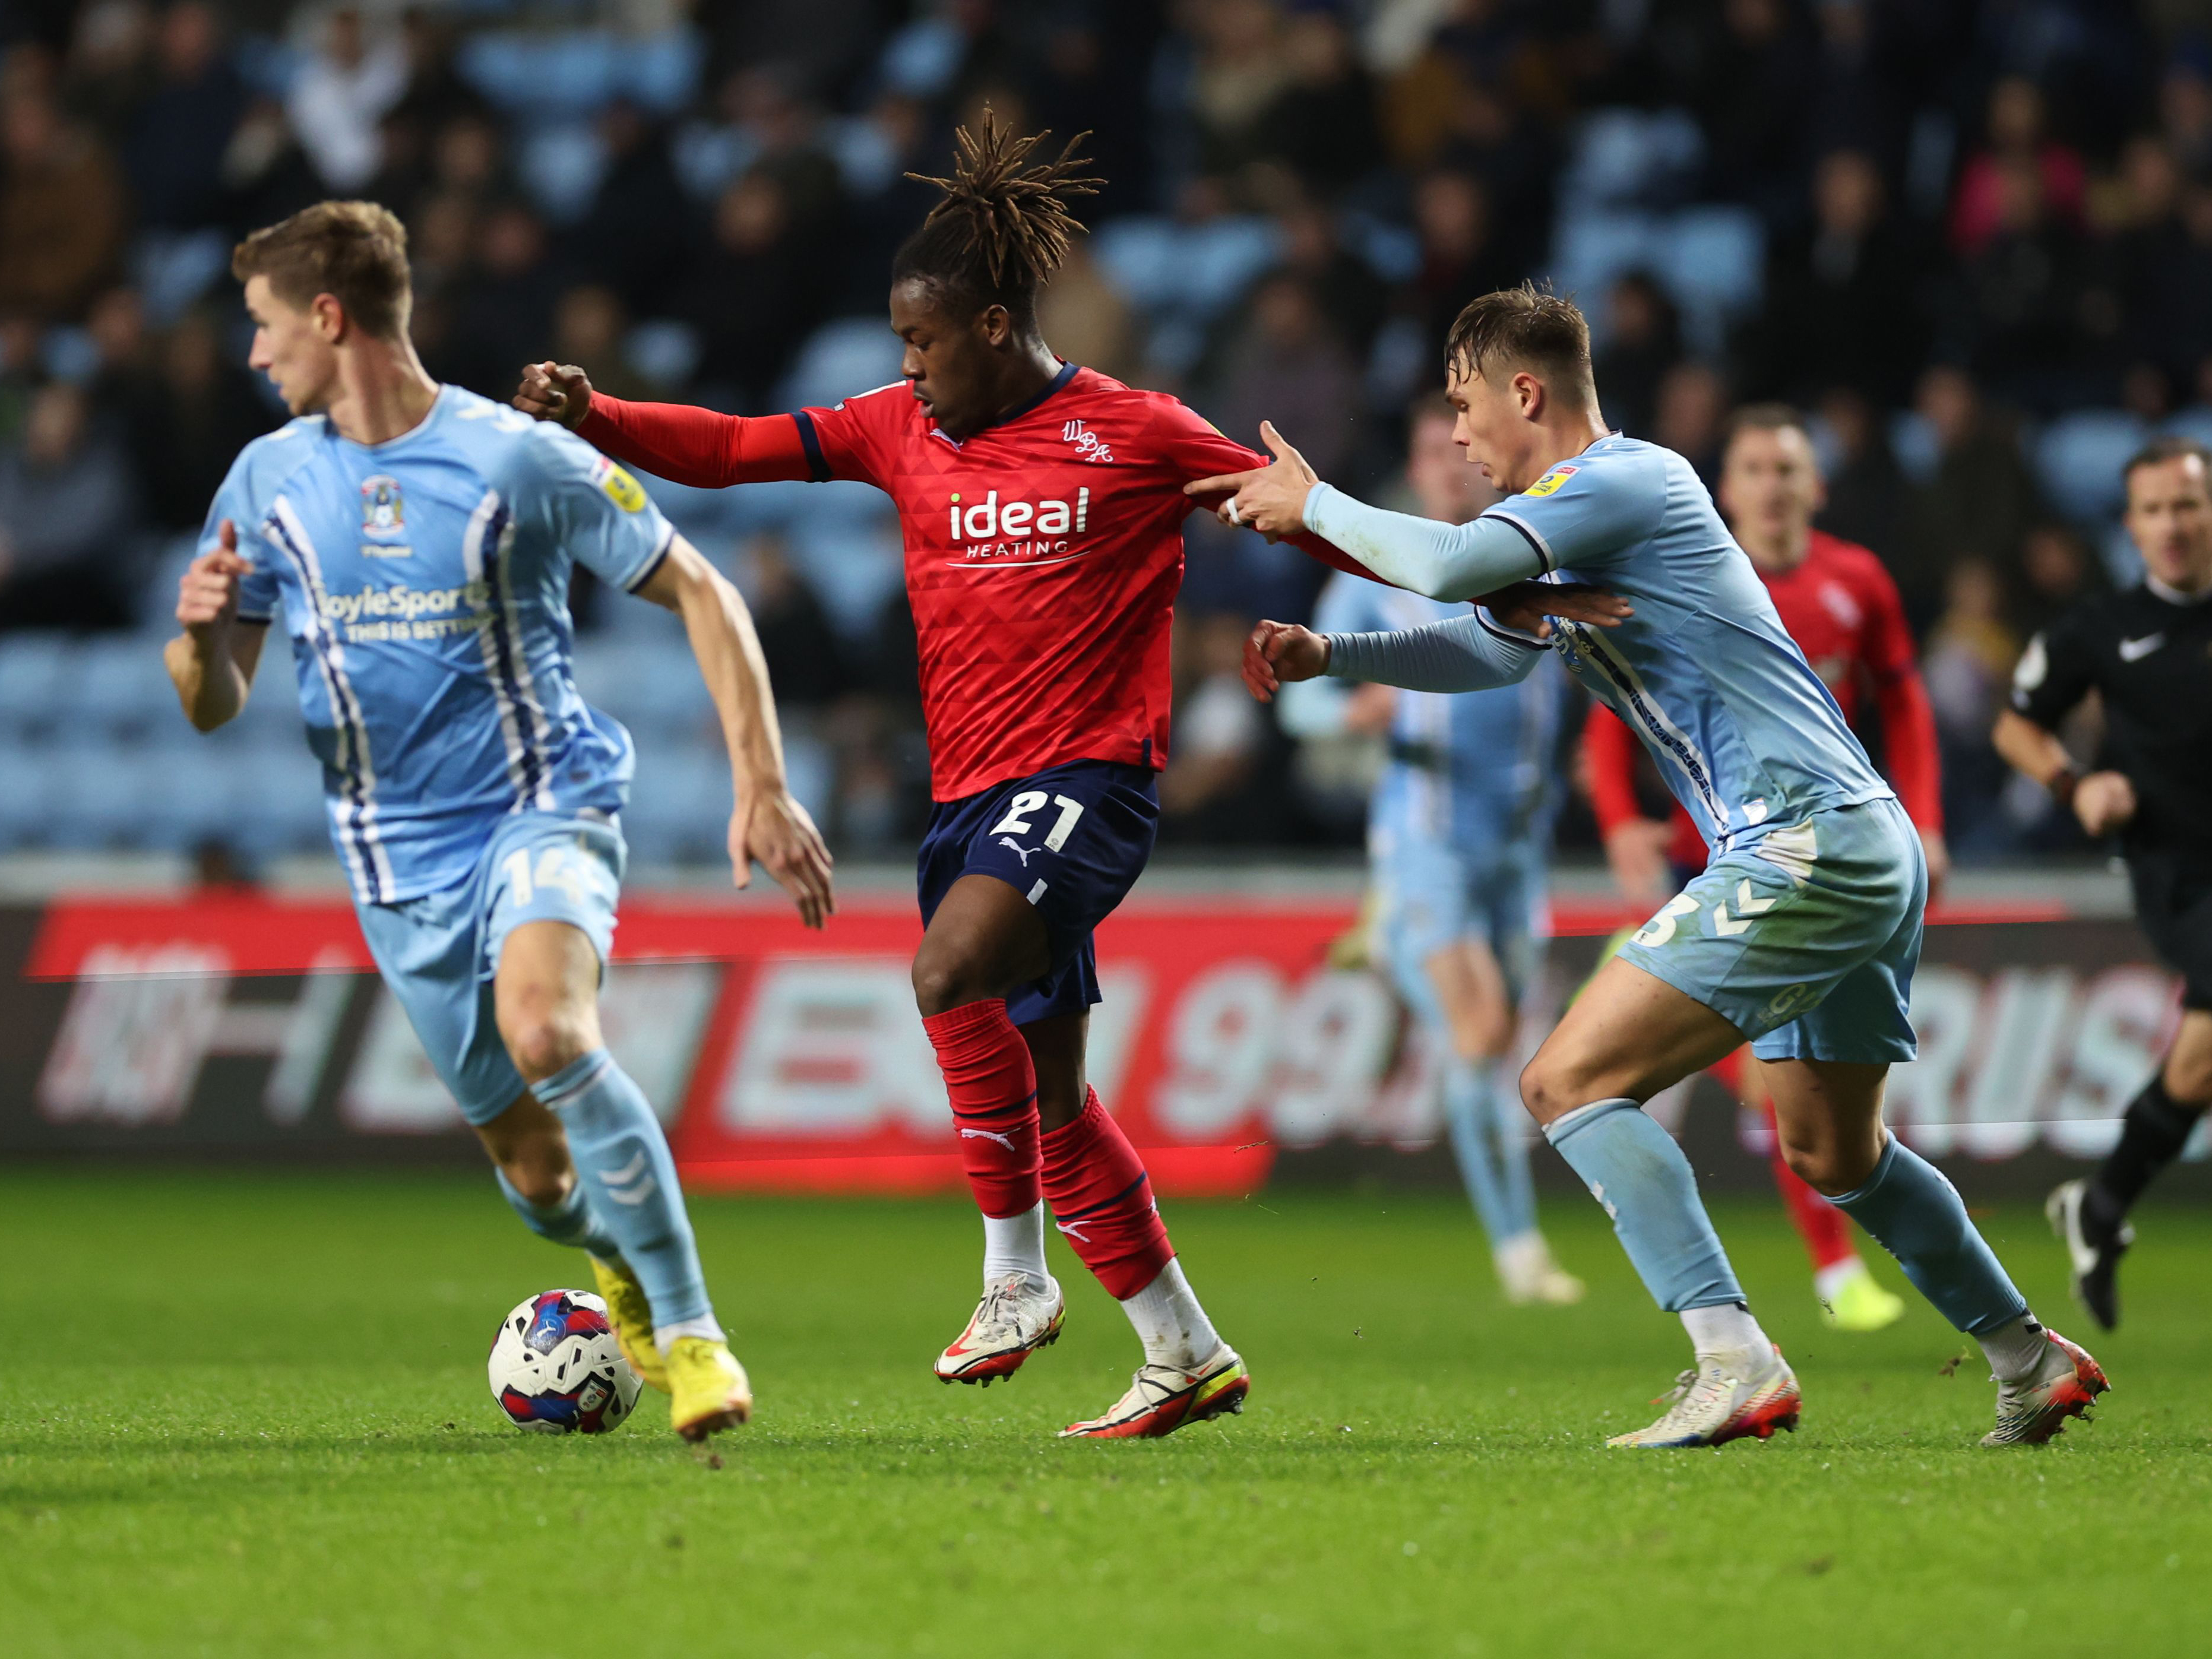 An image of Brandon Thomas-Asante on the ball against Coventry City